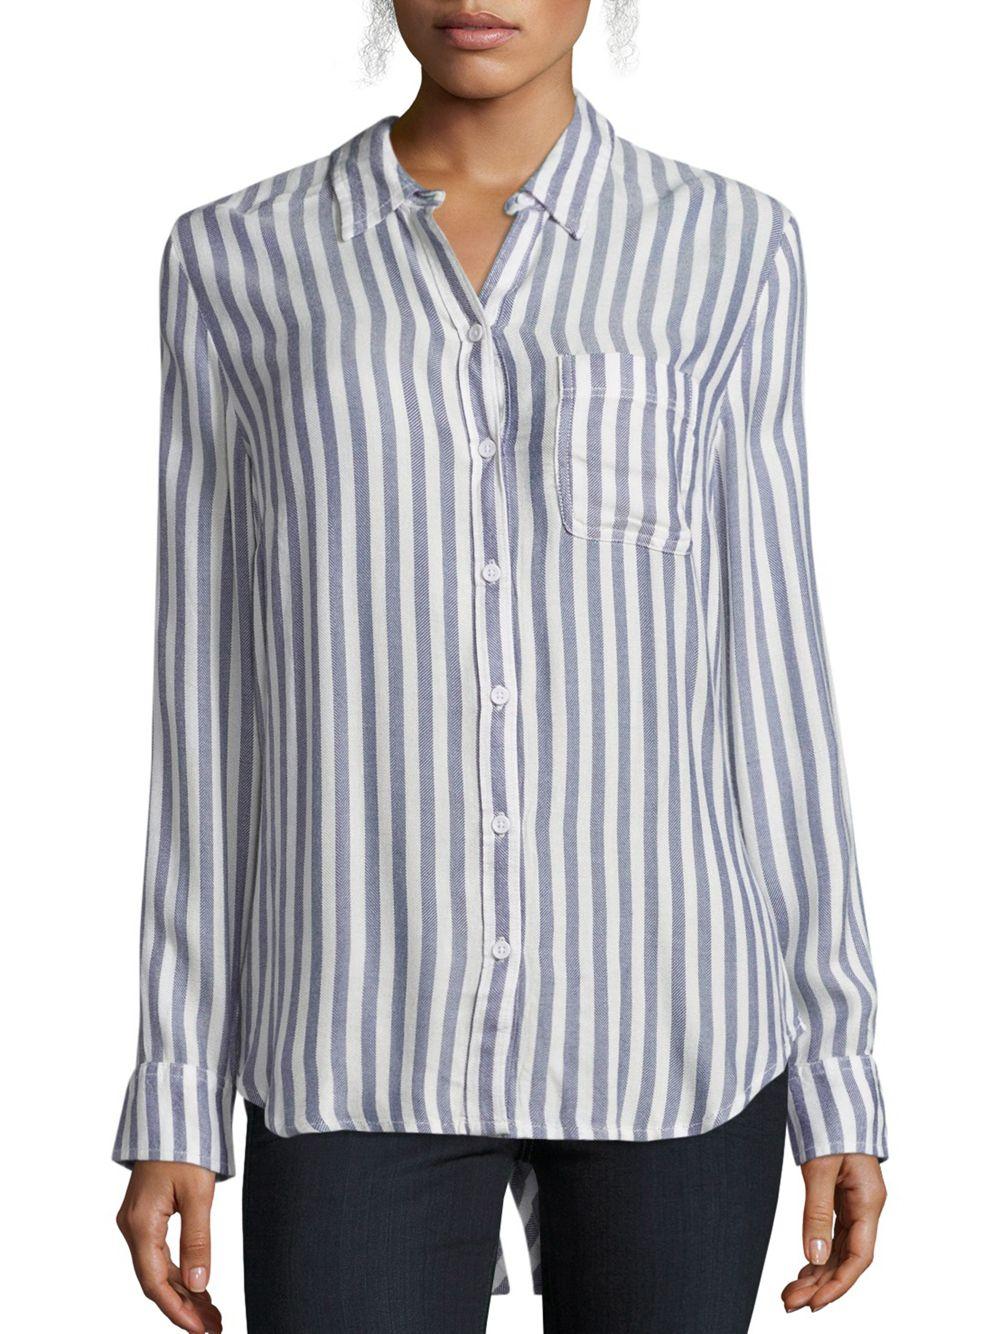 Beach lunch lounge Long Sleeve Striped Shirt in Blue | Lyst